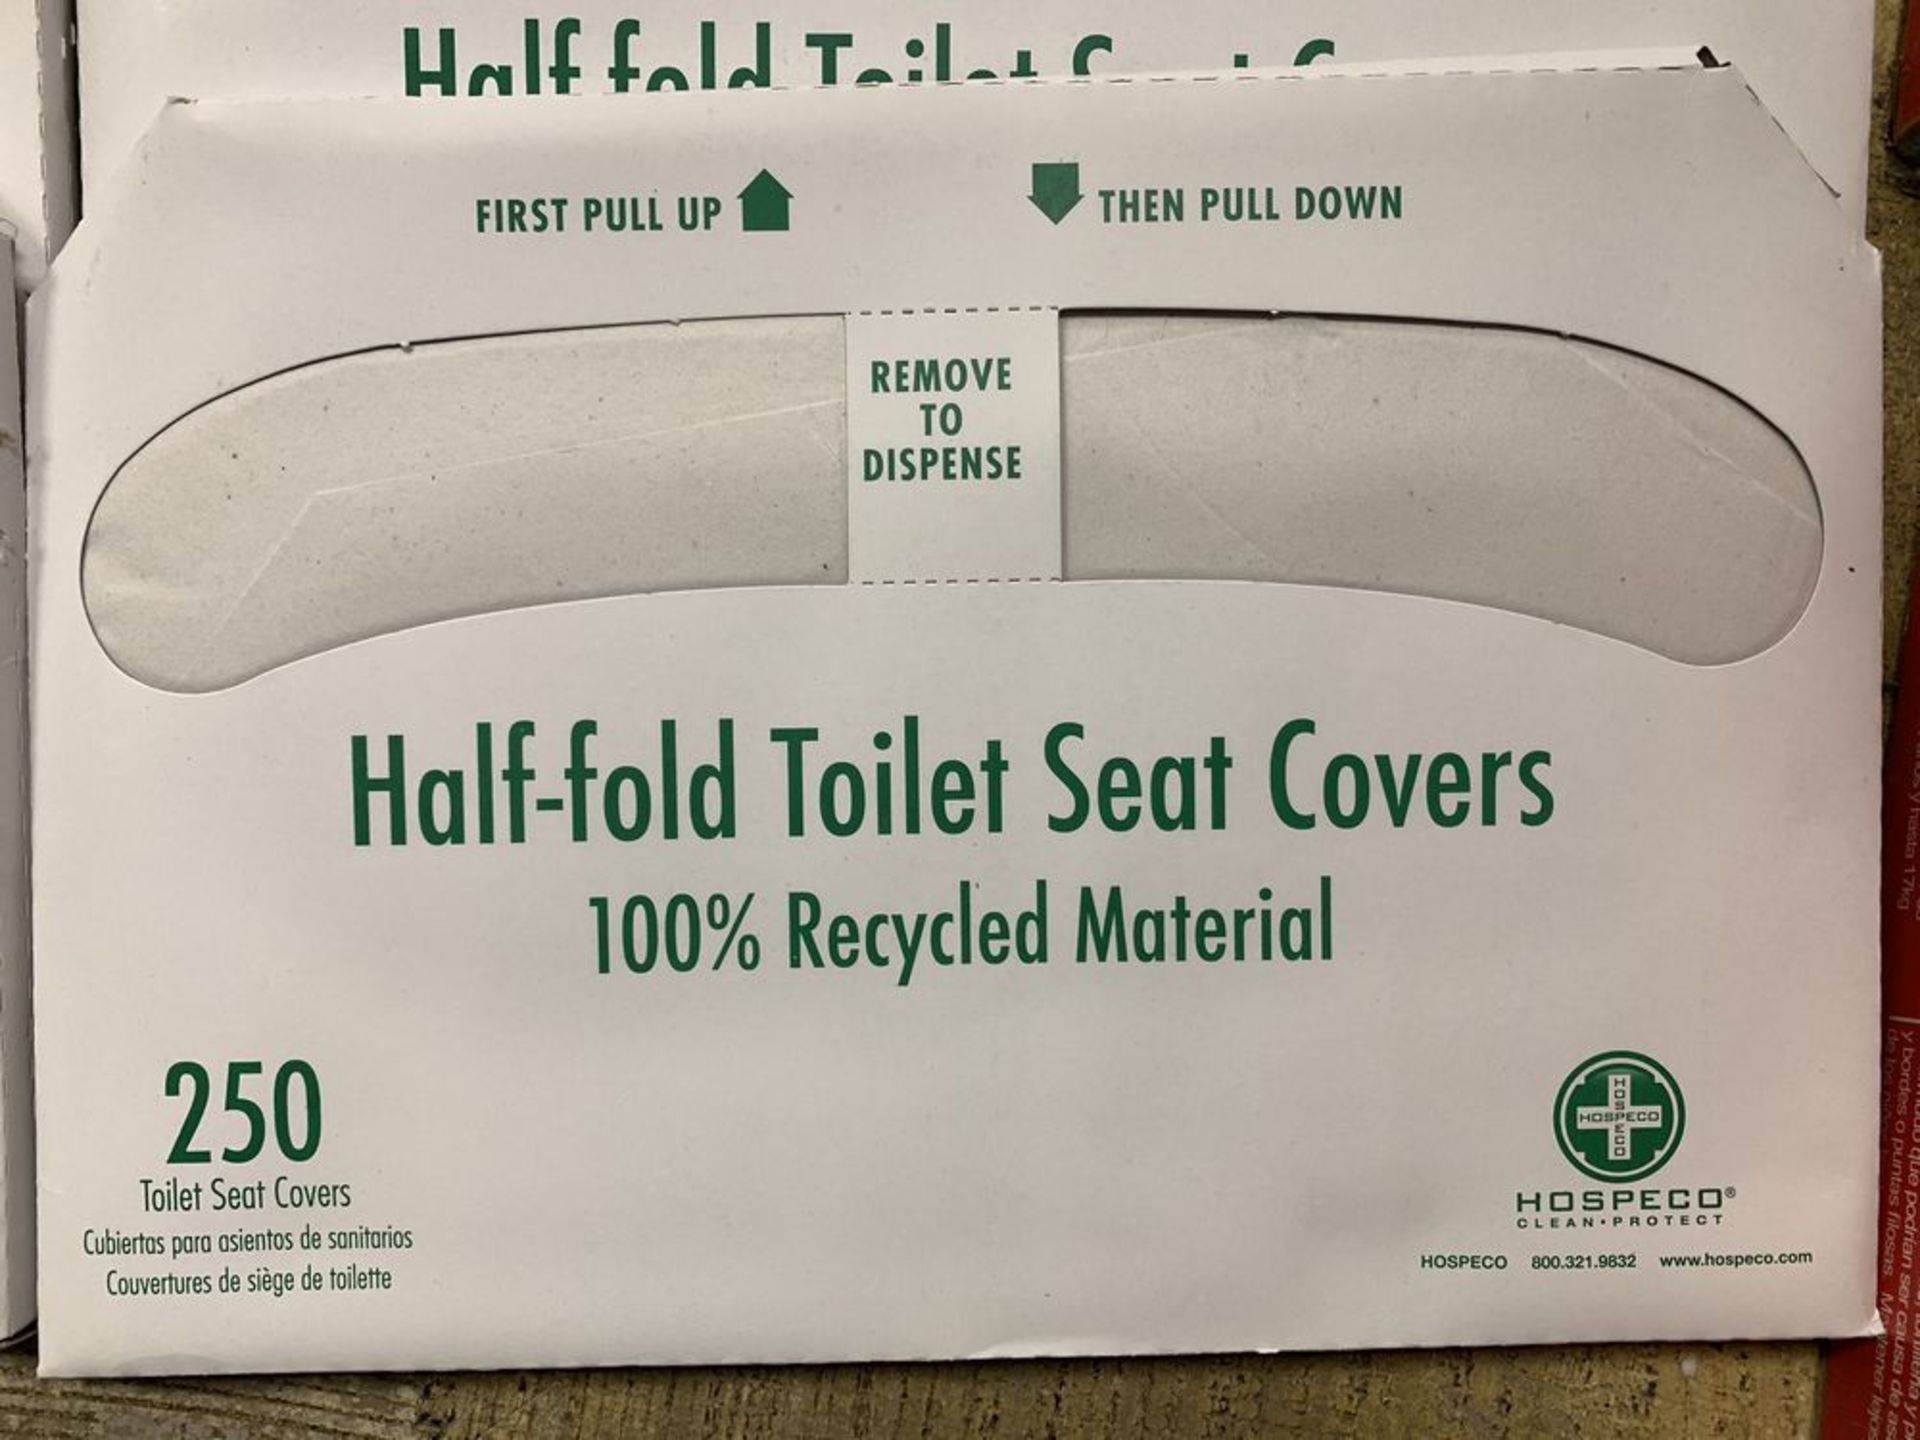 32 PACKS - HOSPECO HEALTHGARD TOILET SEAT COVERS - WHITE 250 COVERS/ PACK - HALF FOLD - MODEL - Image 2 of 5